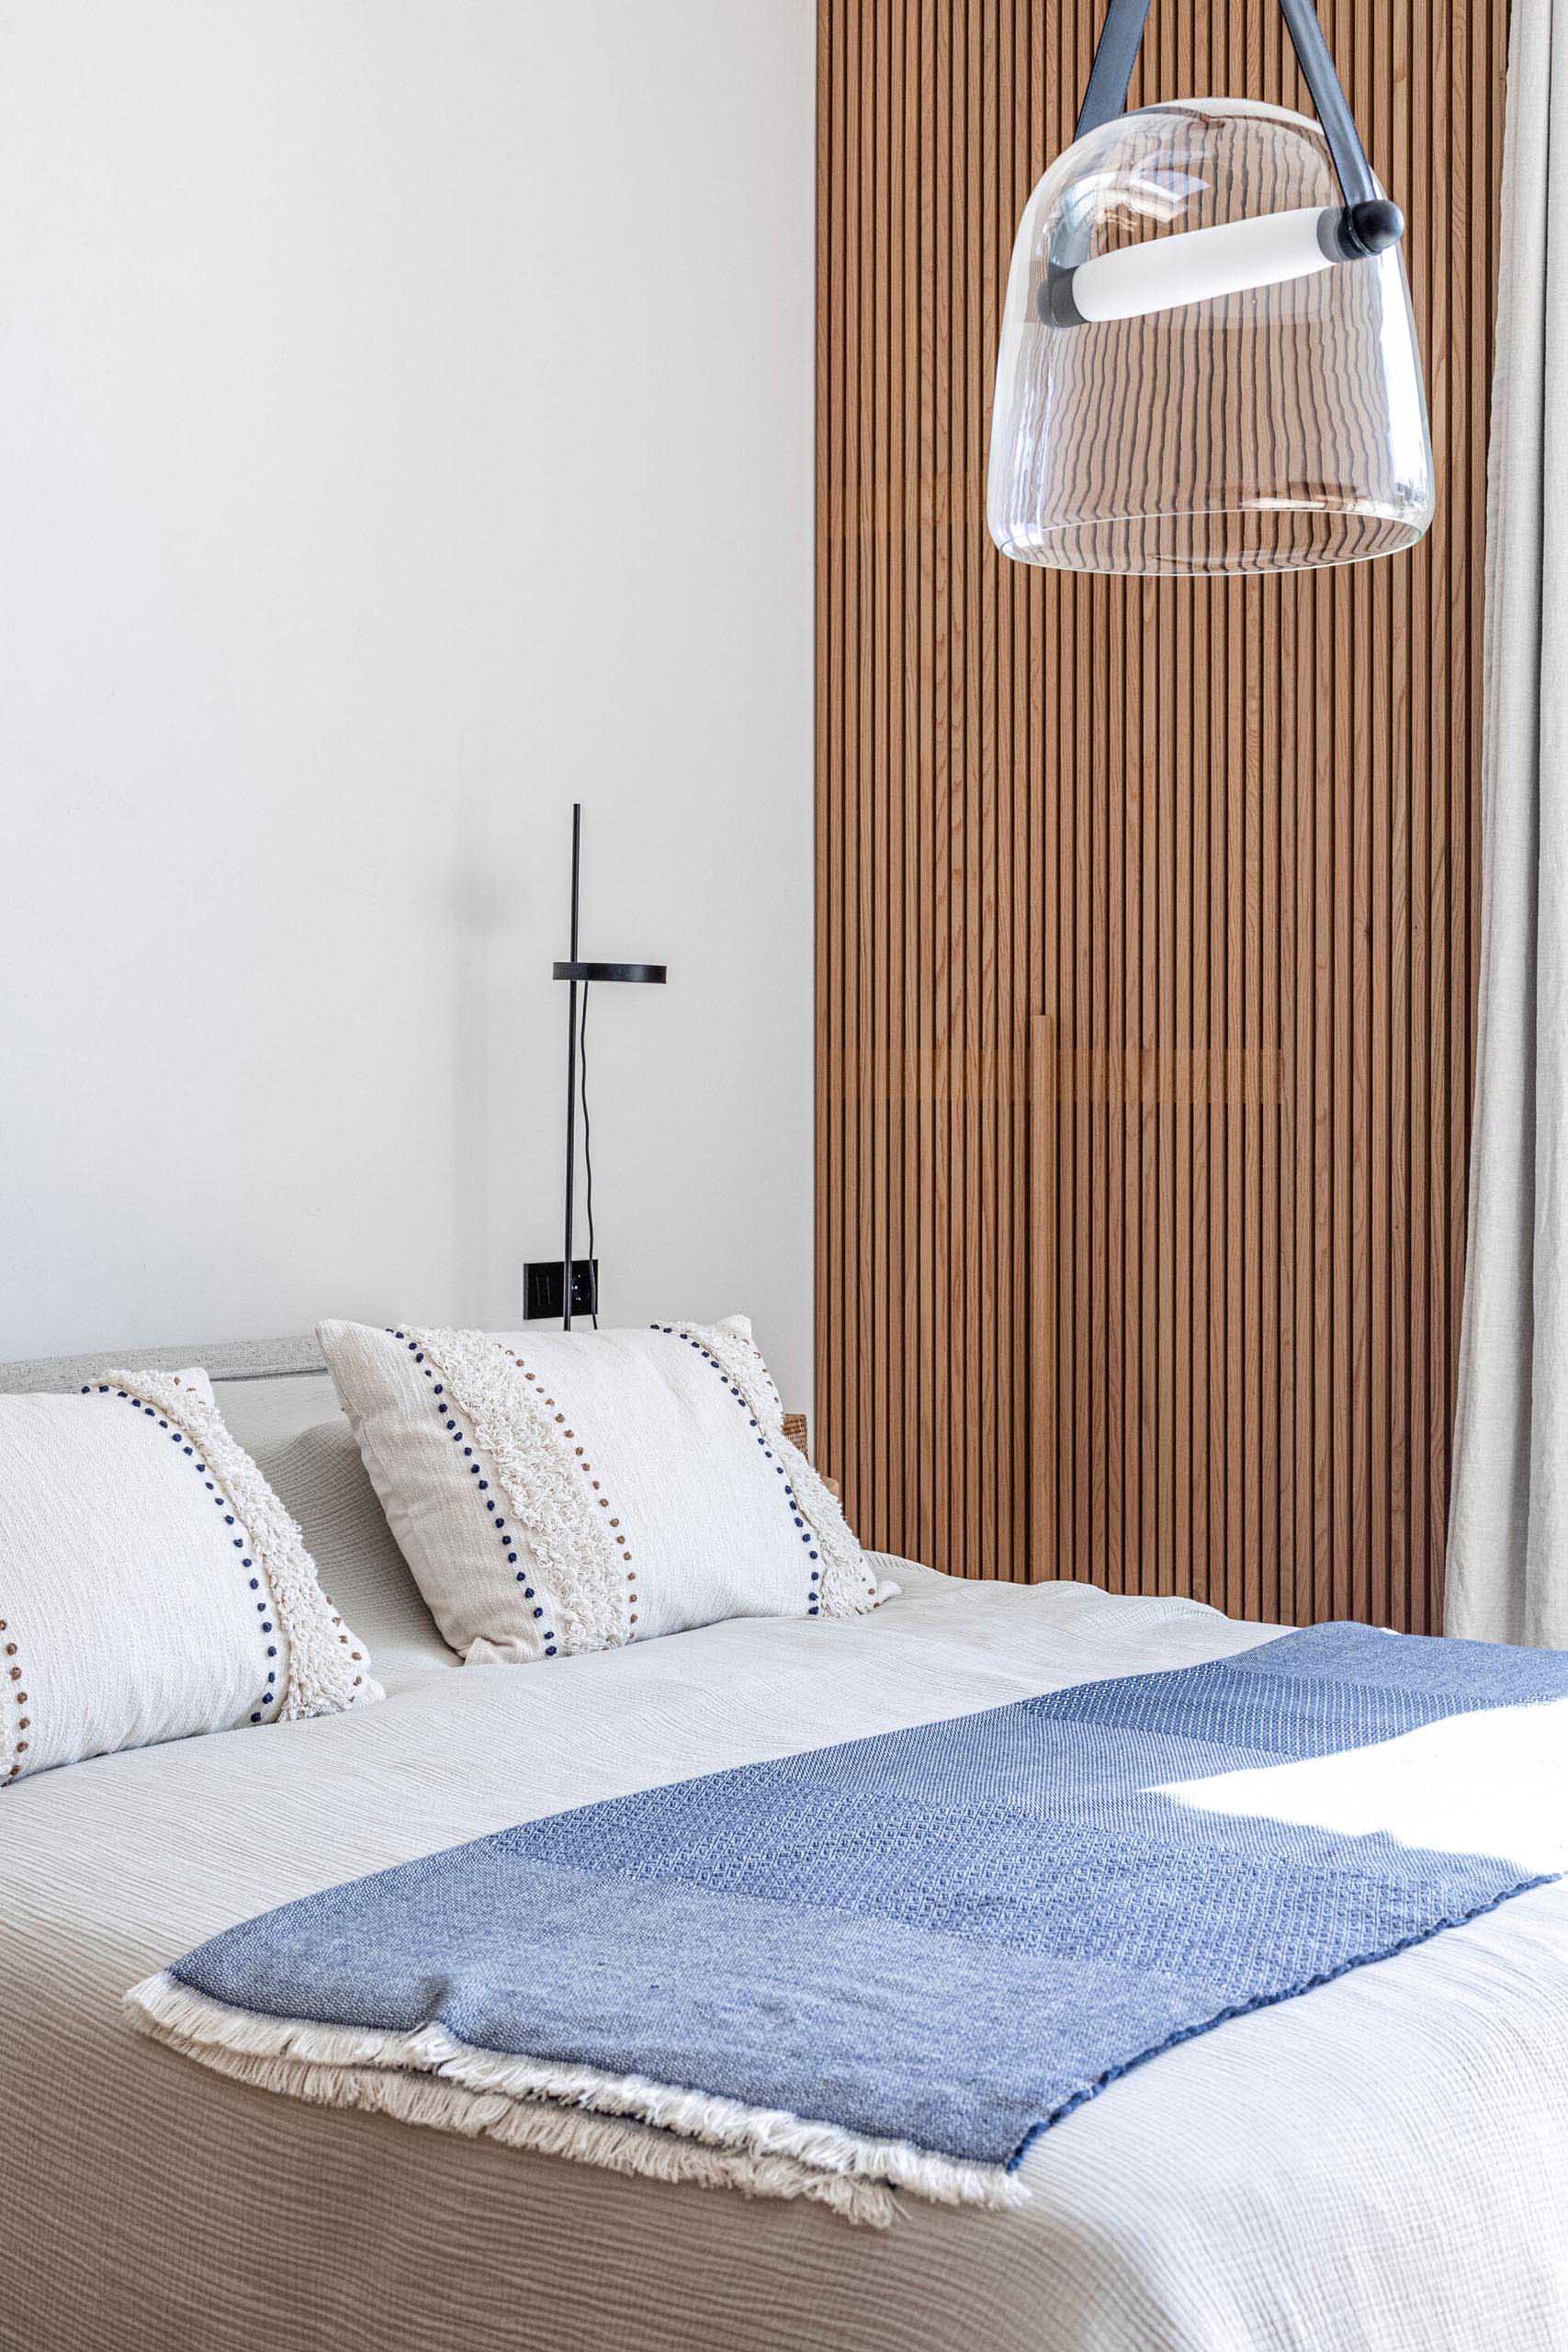 A modern bedroom with a wood slat accent that hides a closet.